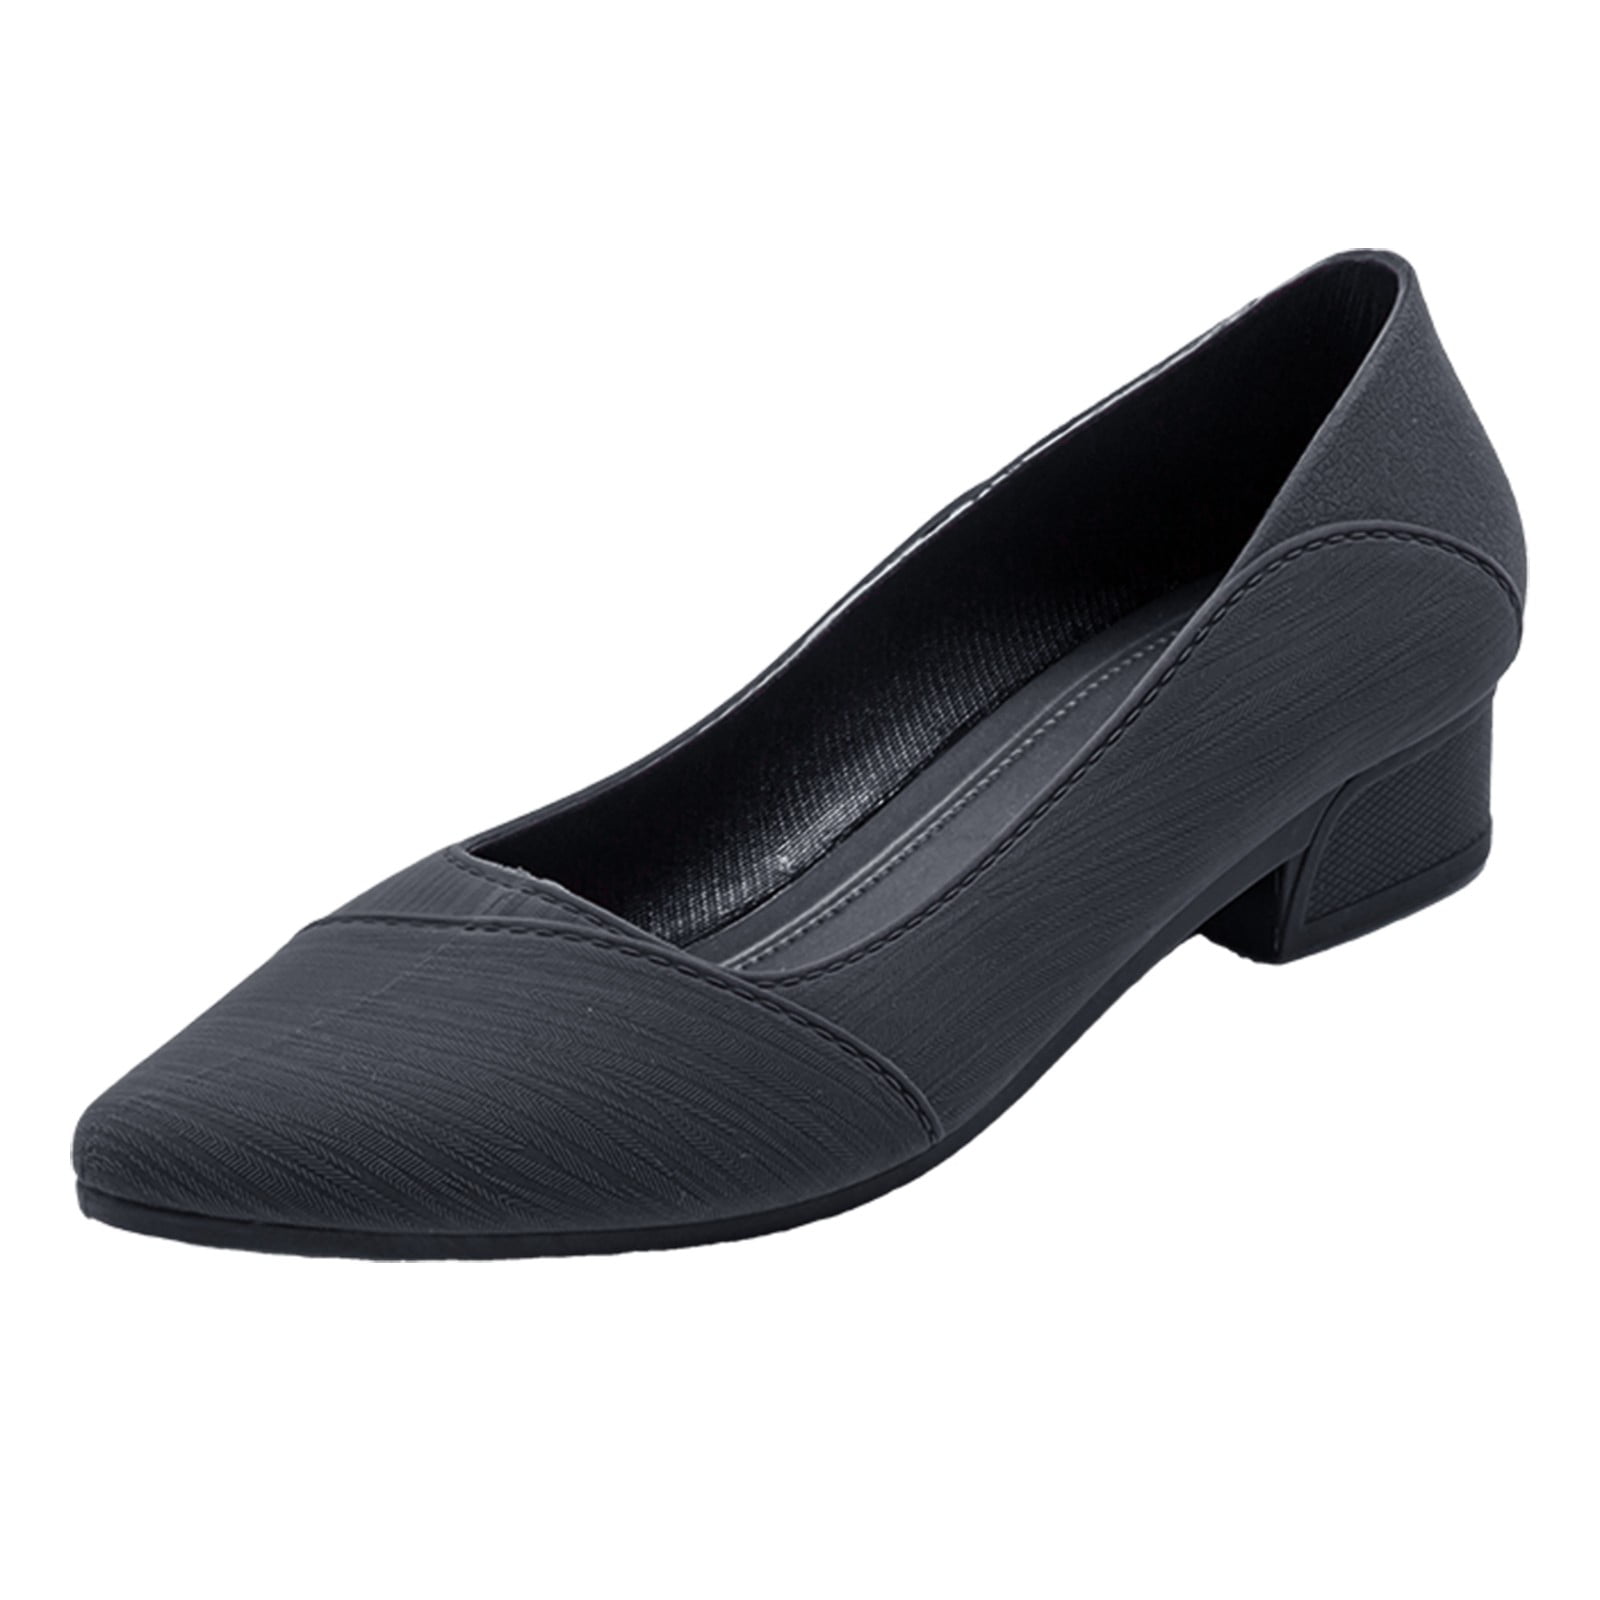 arch support dress shoes women